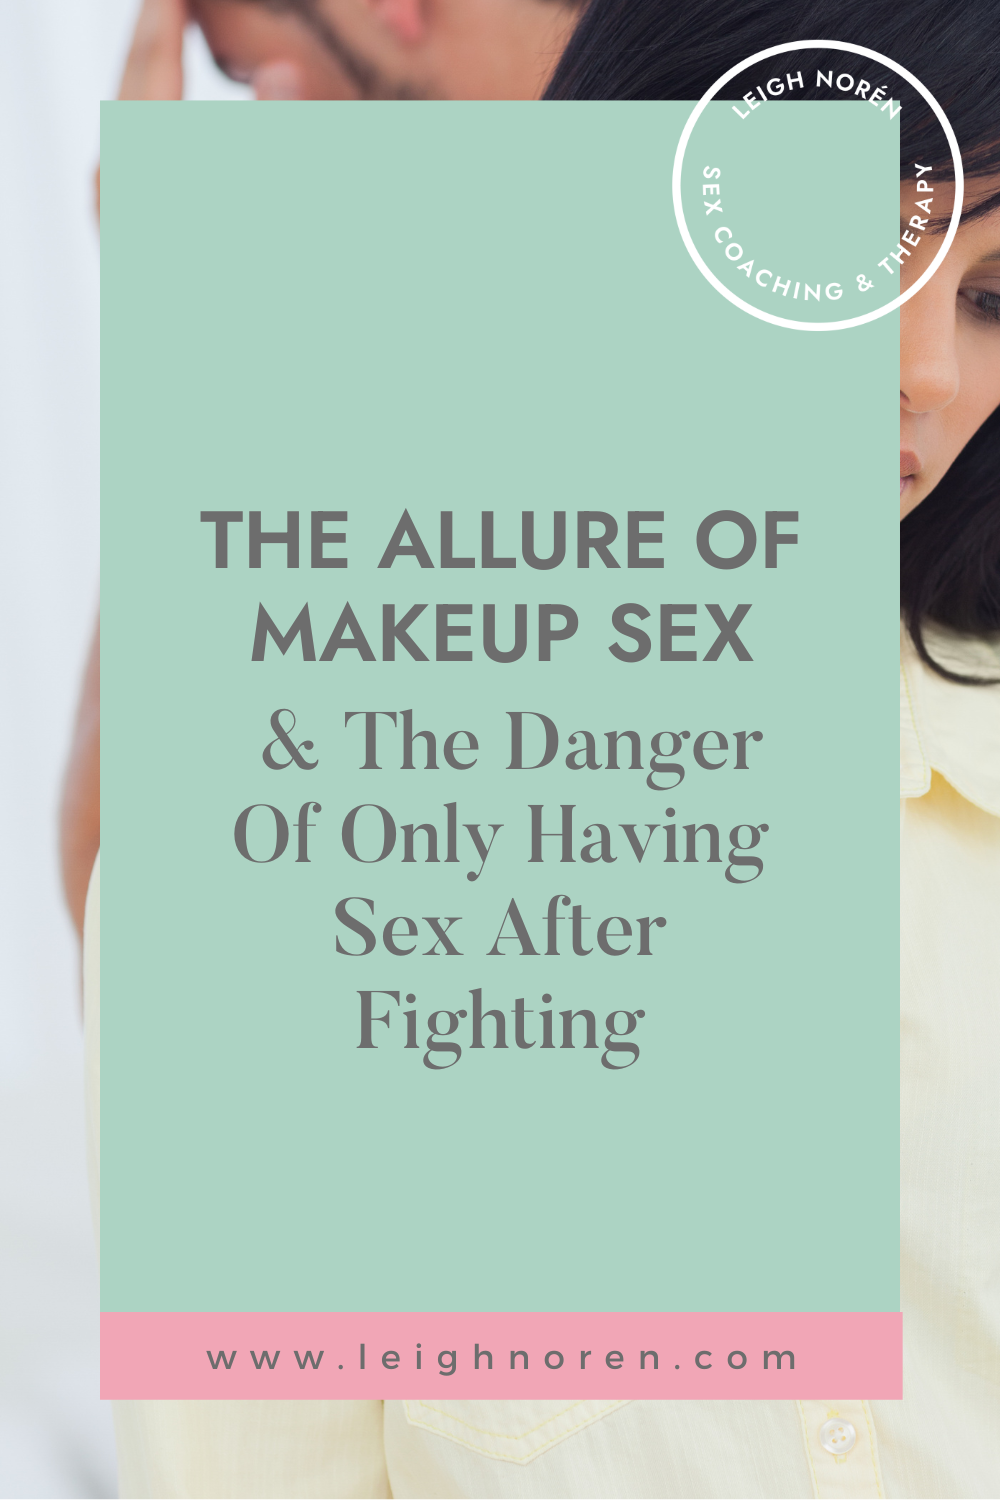 The Allure Of Makeup Sex & The Danger Of Only Having Sex After Fighting